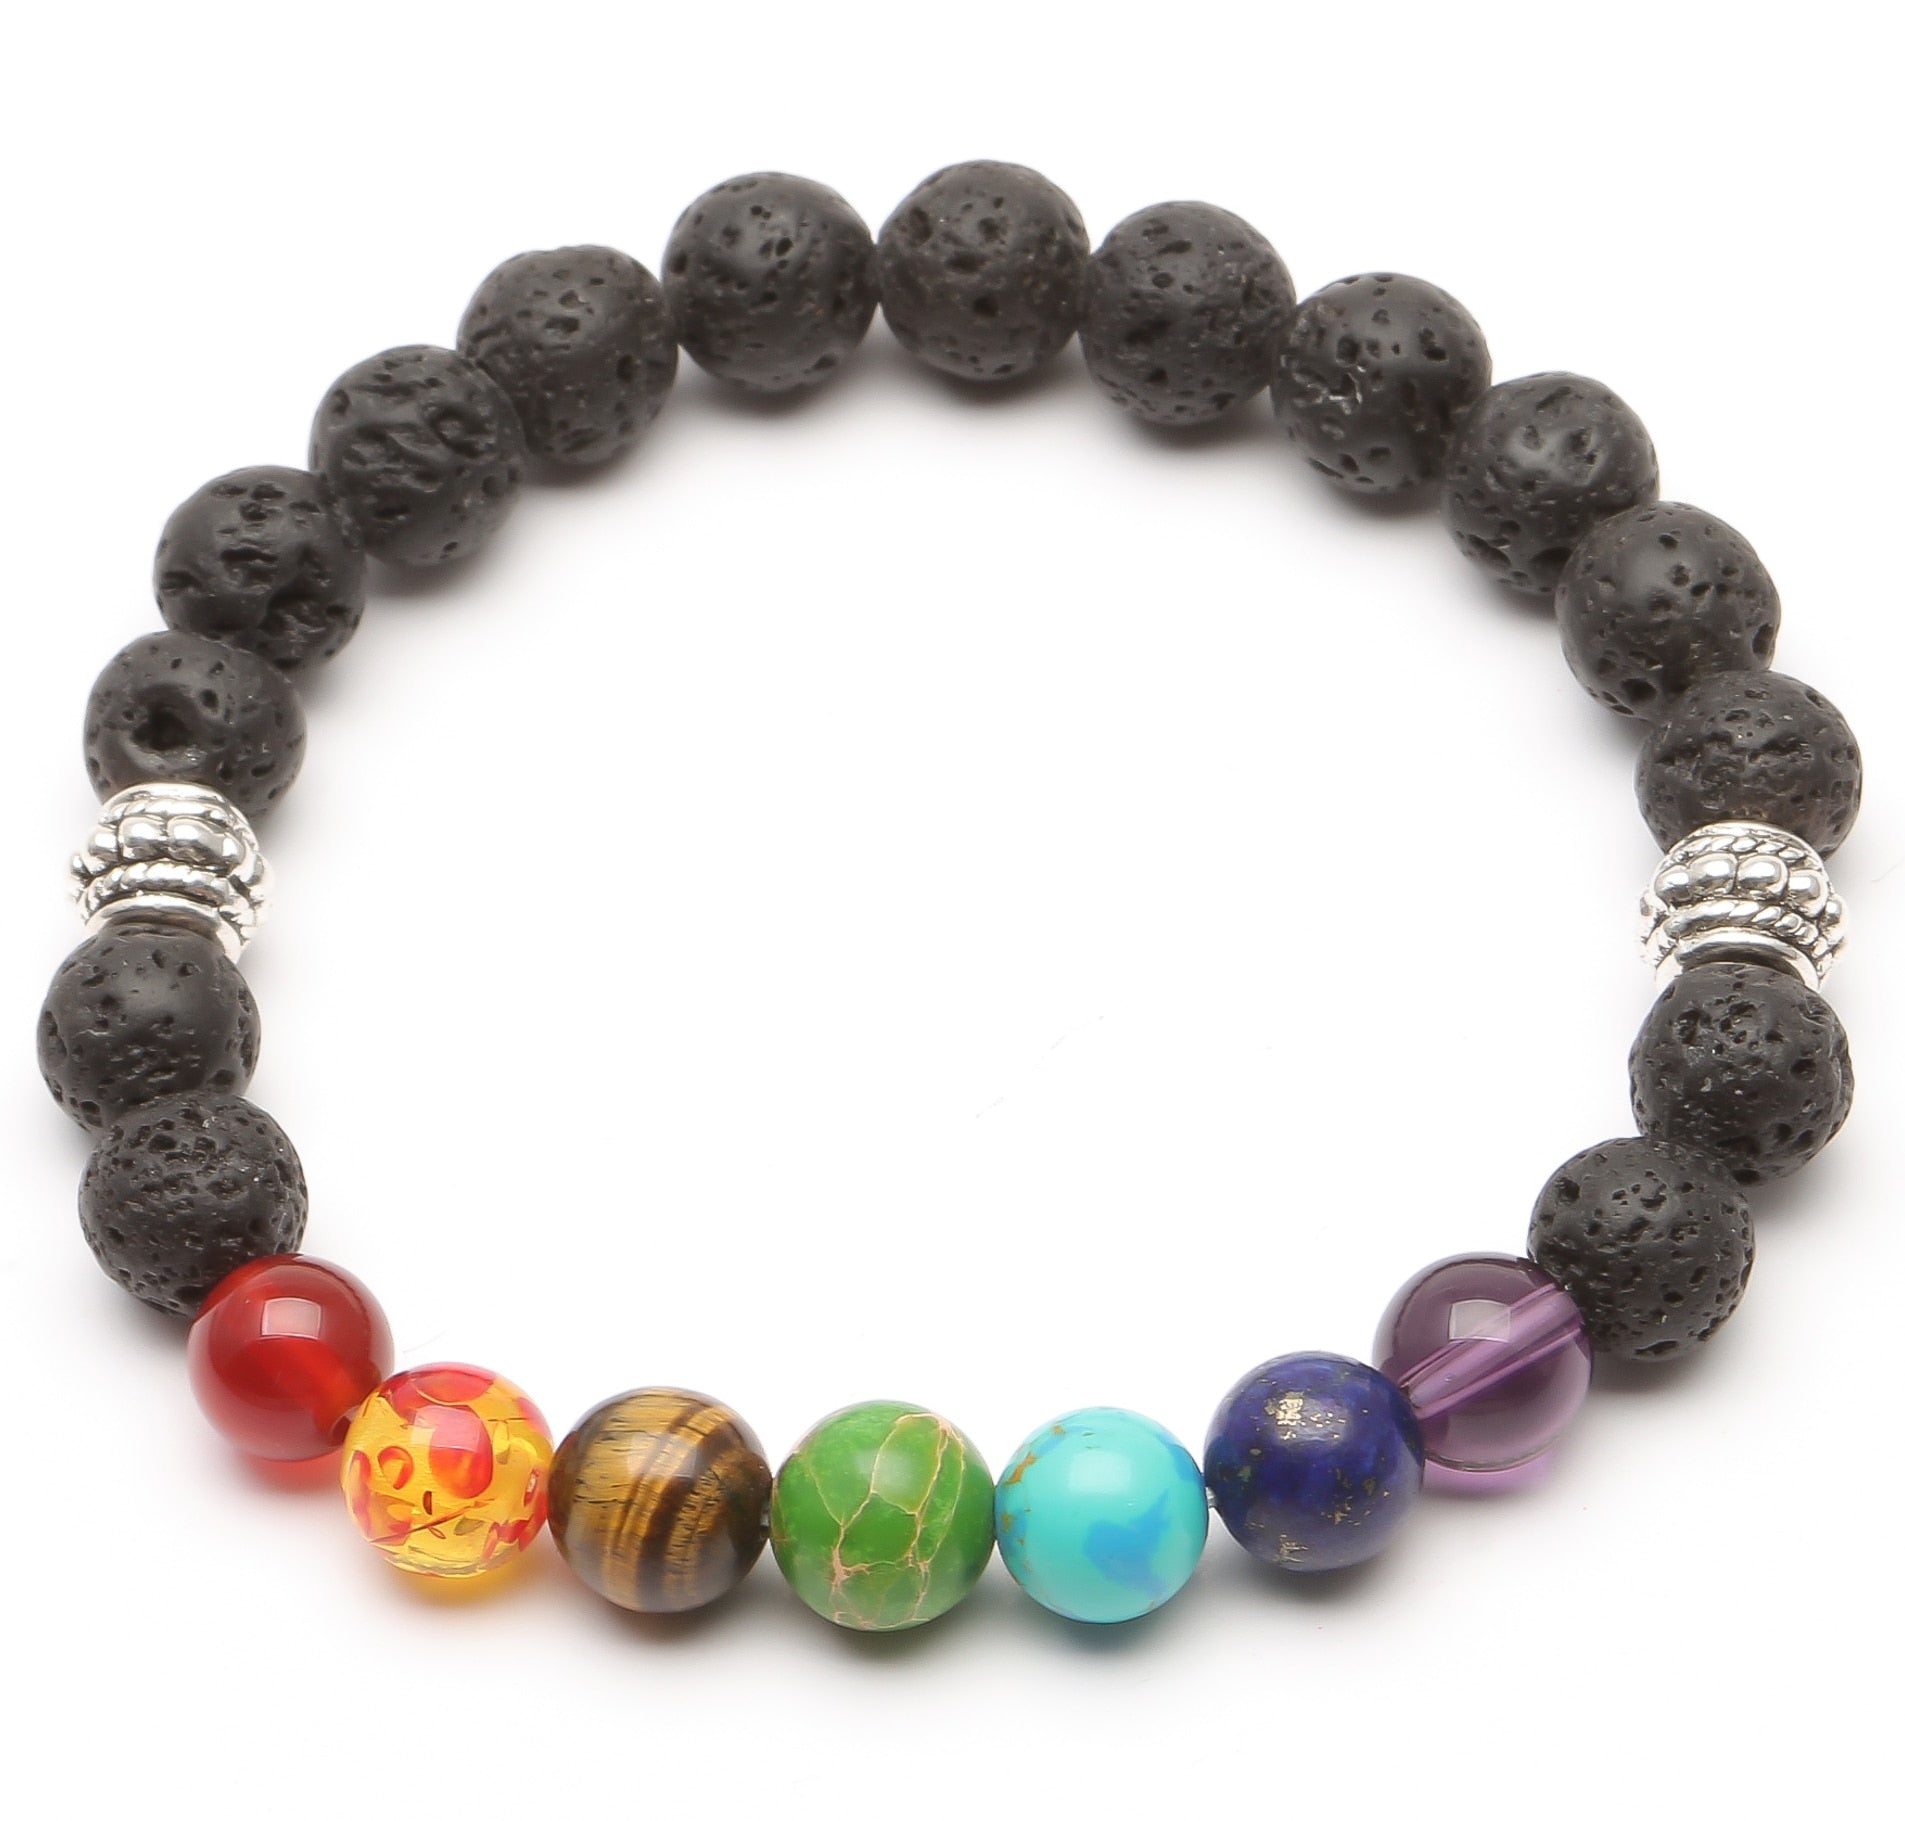 Zen Accessories - 7 Chakras Reiki Stone Bracelet - Yoga Balance Energy Volcanic Stones Beads - Stone Accessories - Personal Hour for Yoga and Meditations 